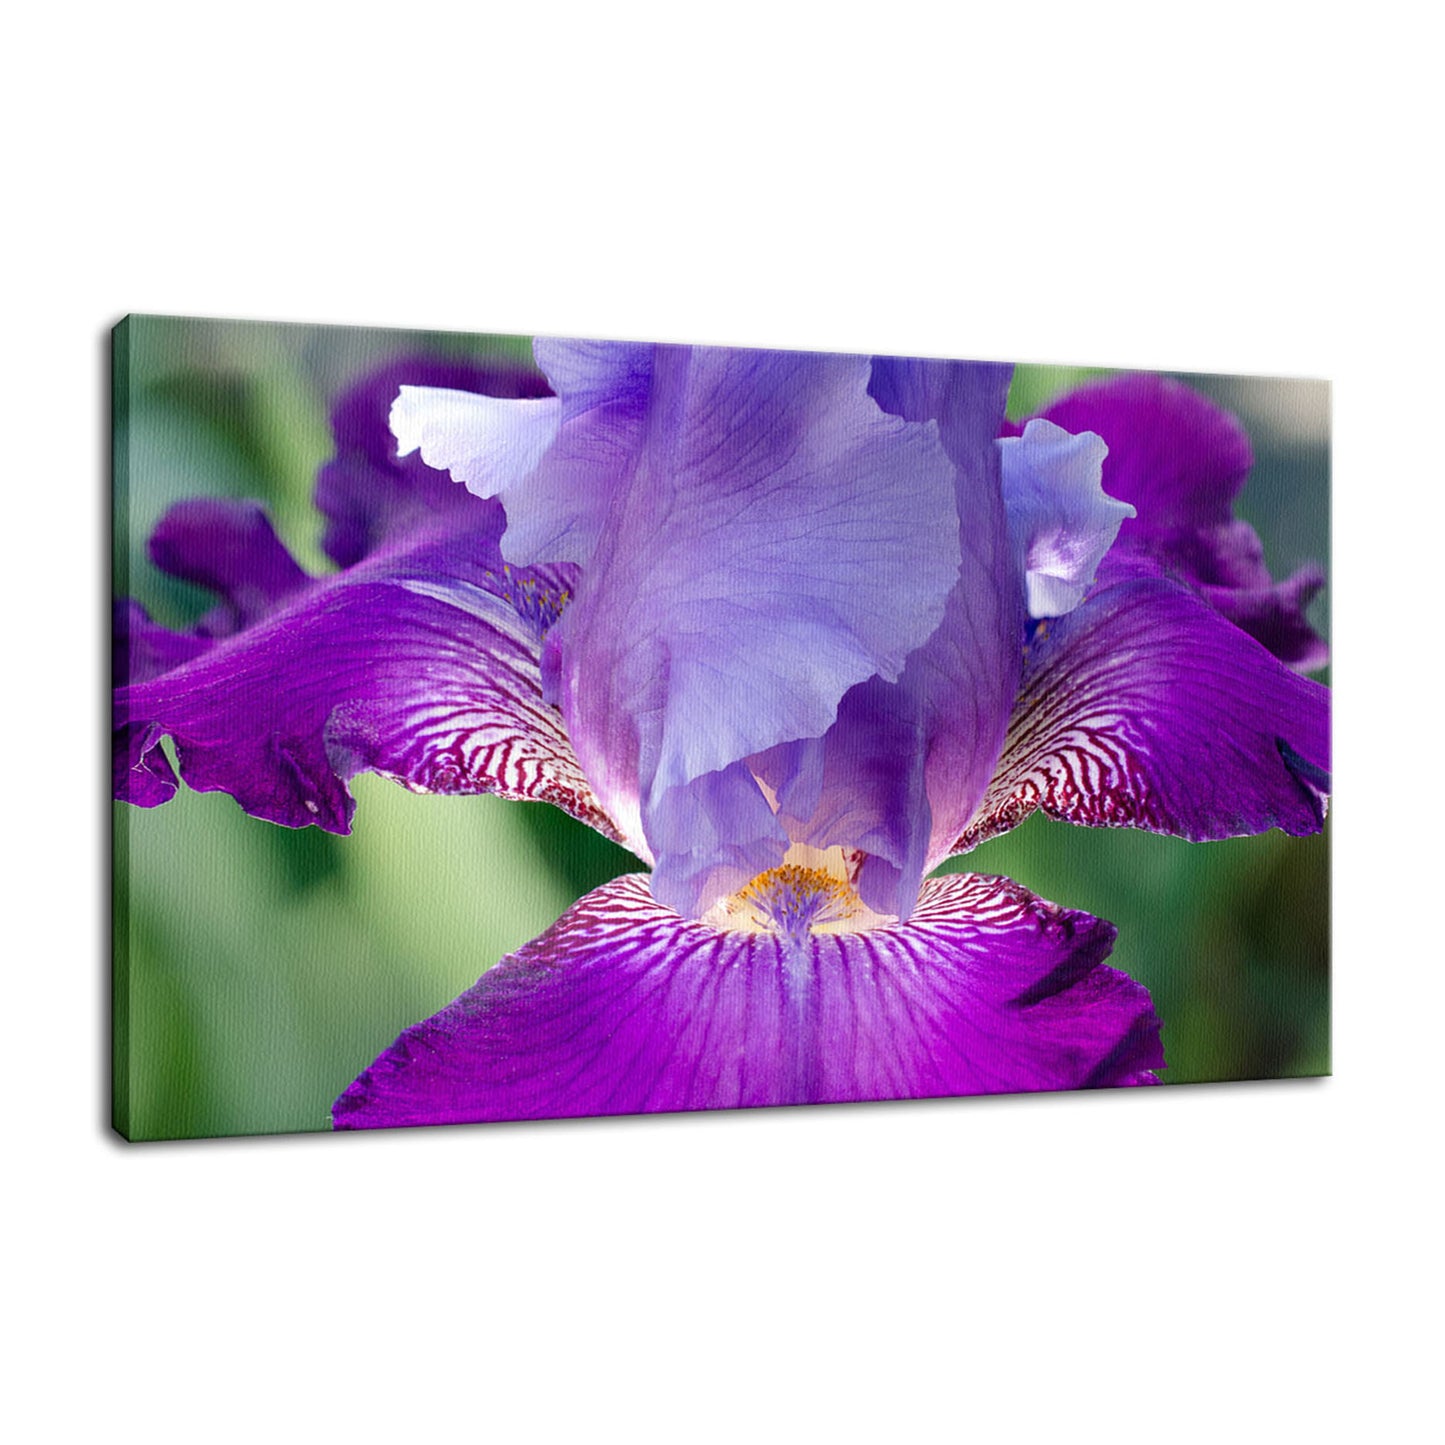 Large Wall Art For Above Bed: Glowing Iris Nature / Floral Photo Fine Art Canvas Wall Art Prints  - PIPAFINEART